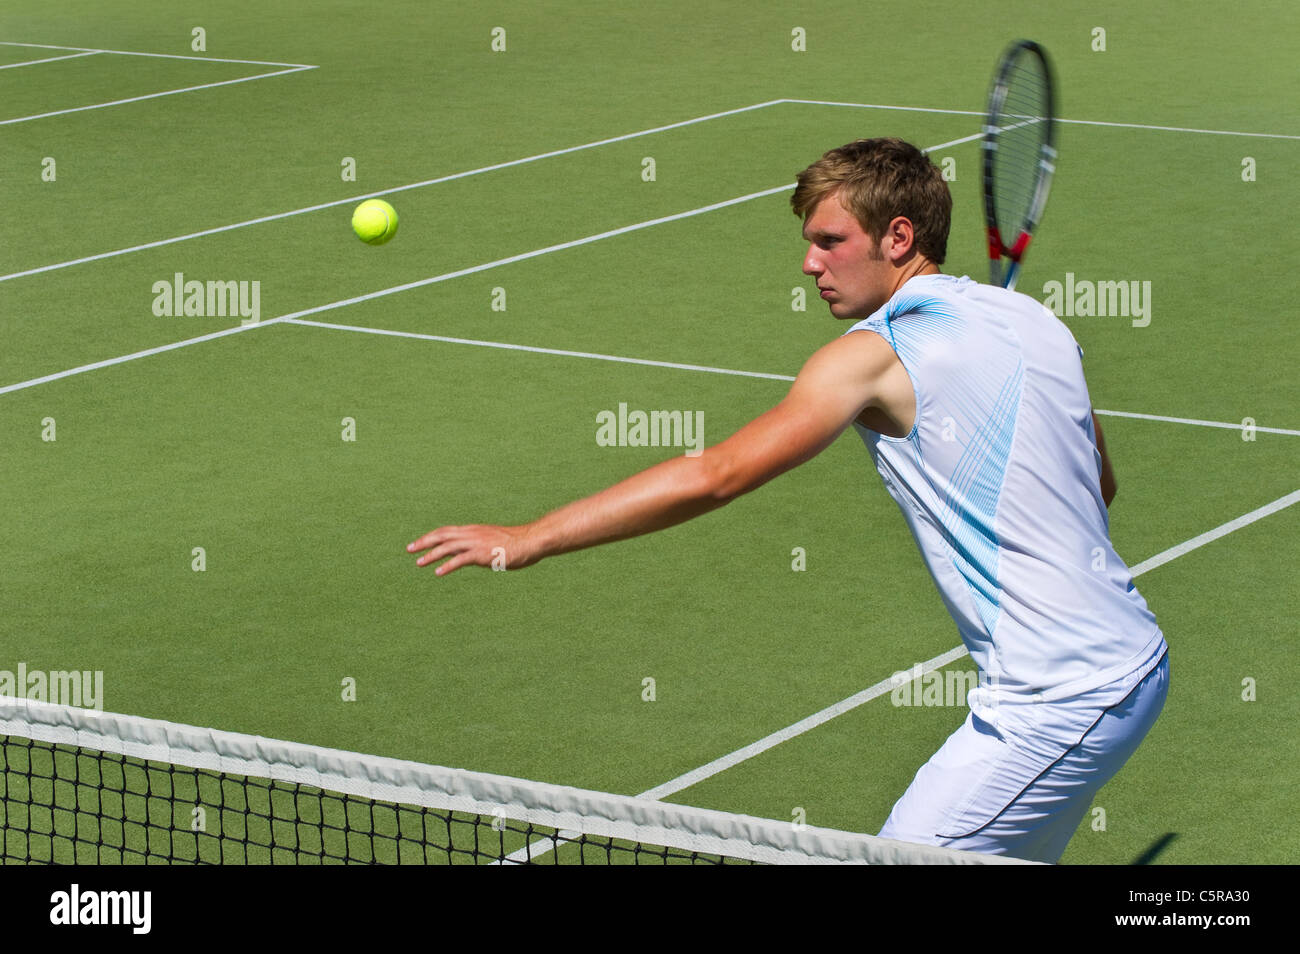 A tennis player focused on the ball. Stock Photo